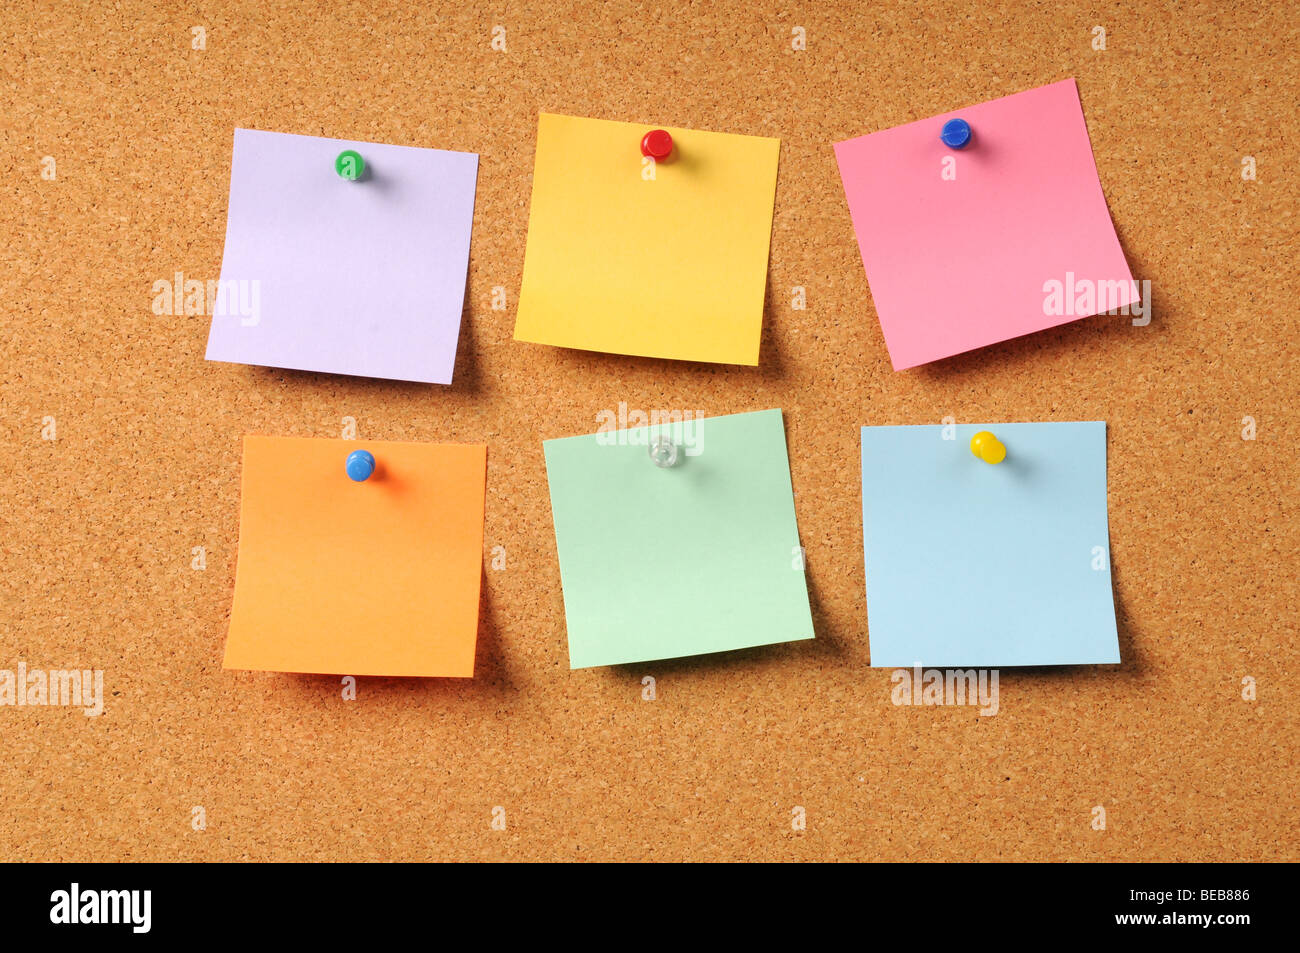 Adhesive notes of various colors pinned to cork surface Stock Photo